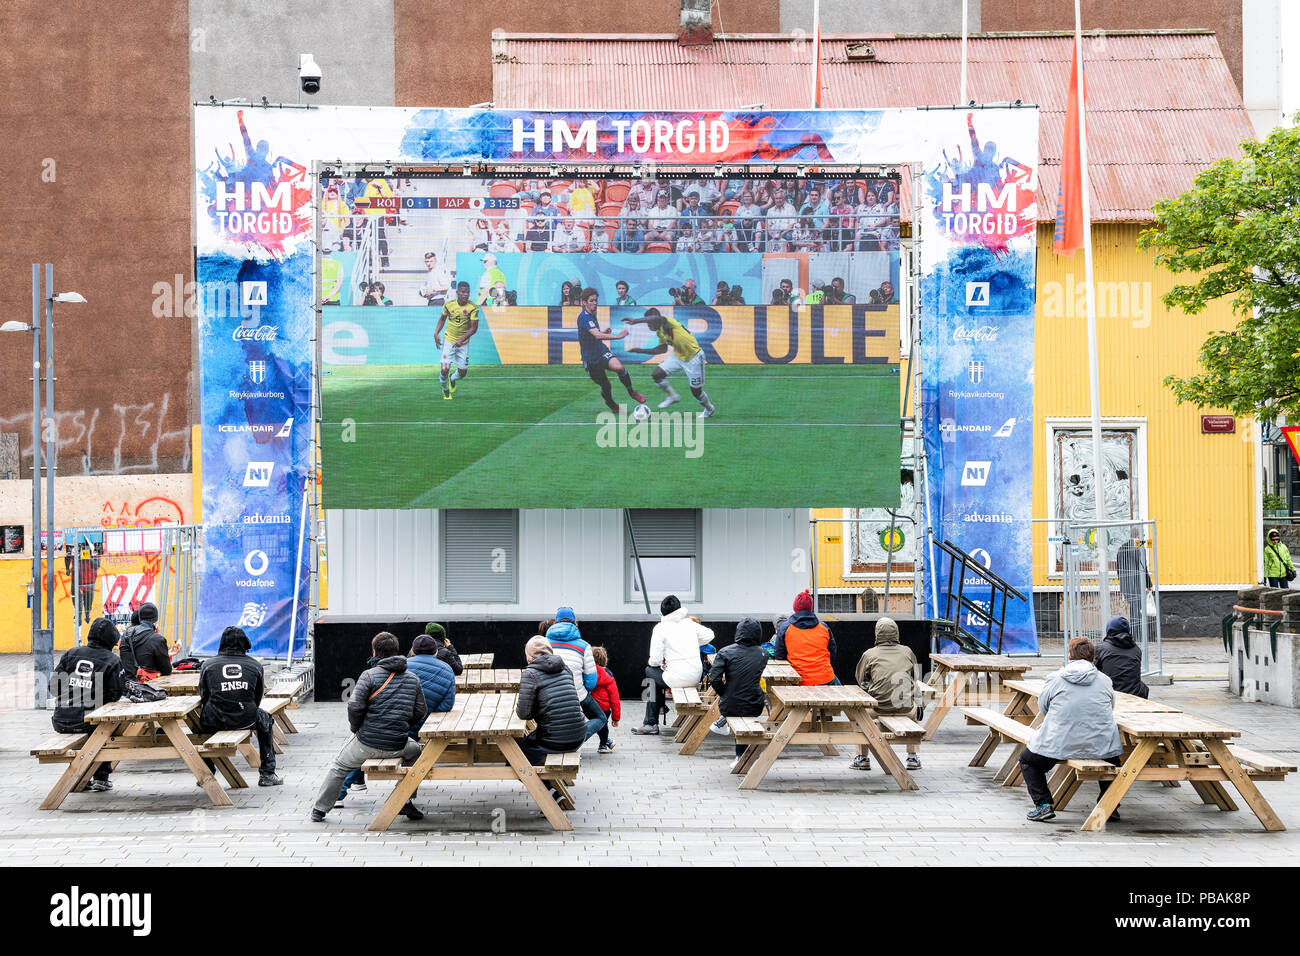 Reykjavik, Iceland - June 19, 2018: Ingolfur Ingolfstorg Square with man walking with signs for HM Torgid, large screen tv television, people watching Stock Photo